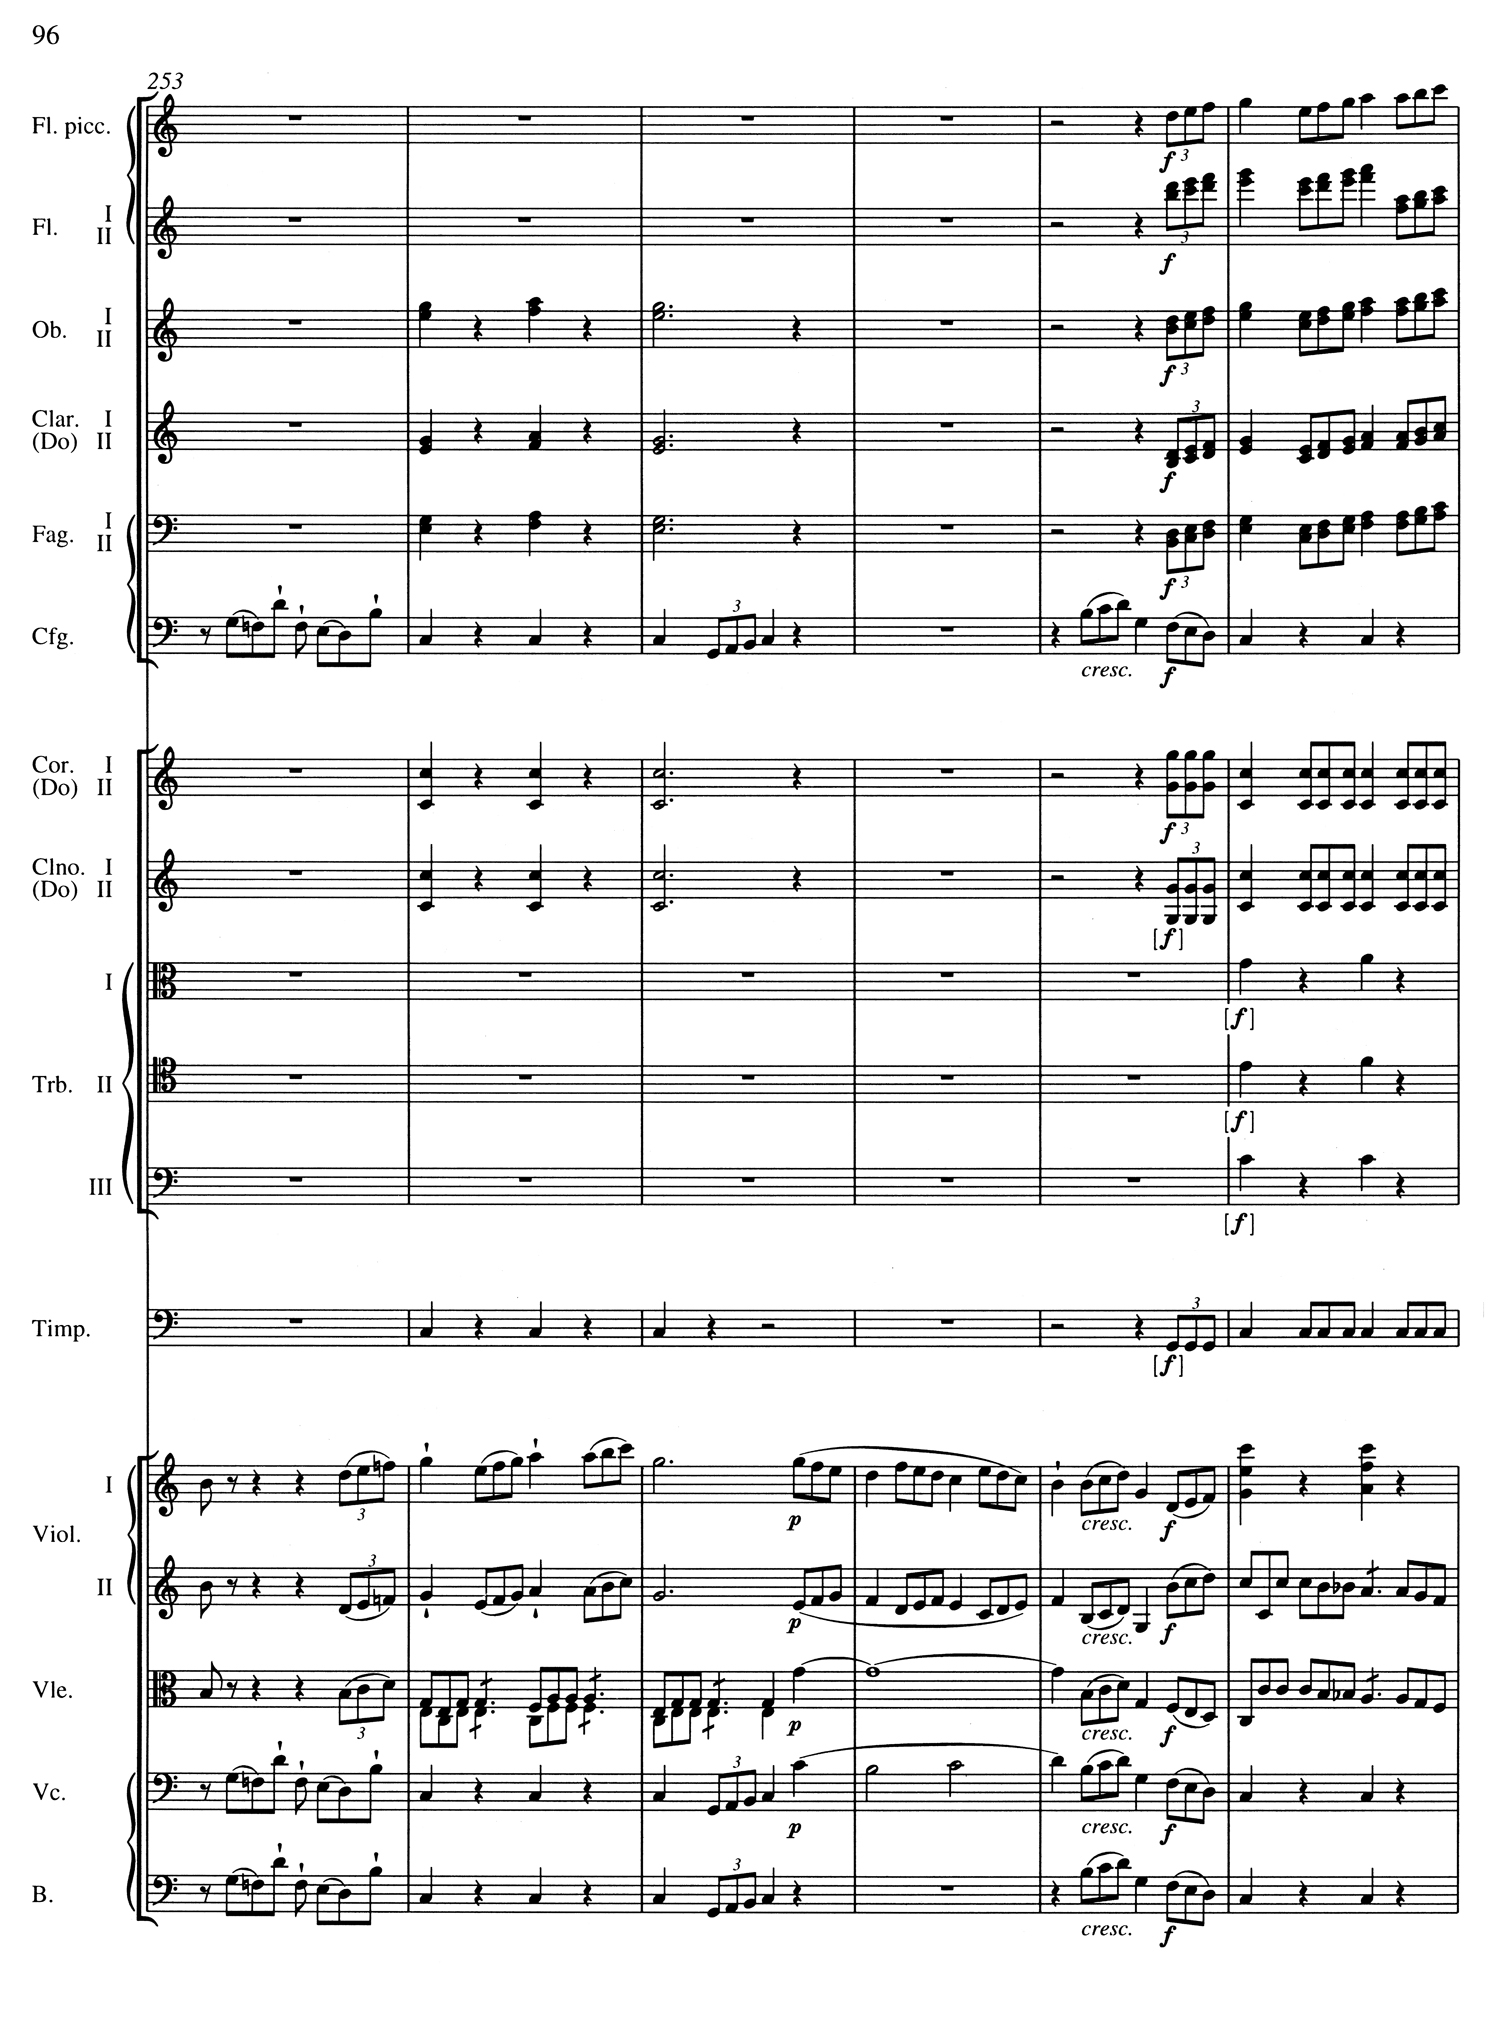 Beethoven 5 Score Page 8.jpg